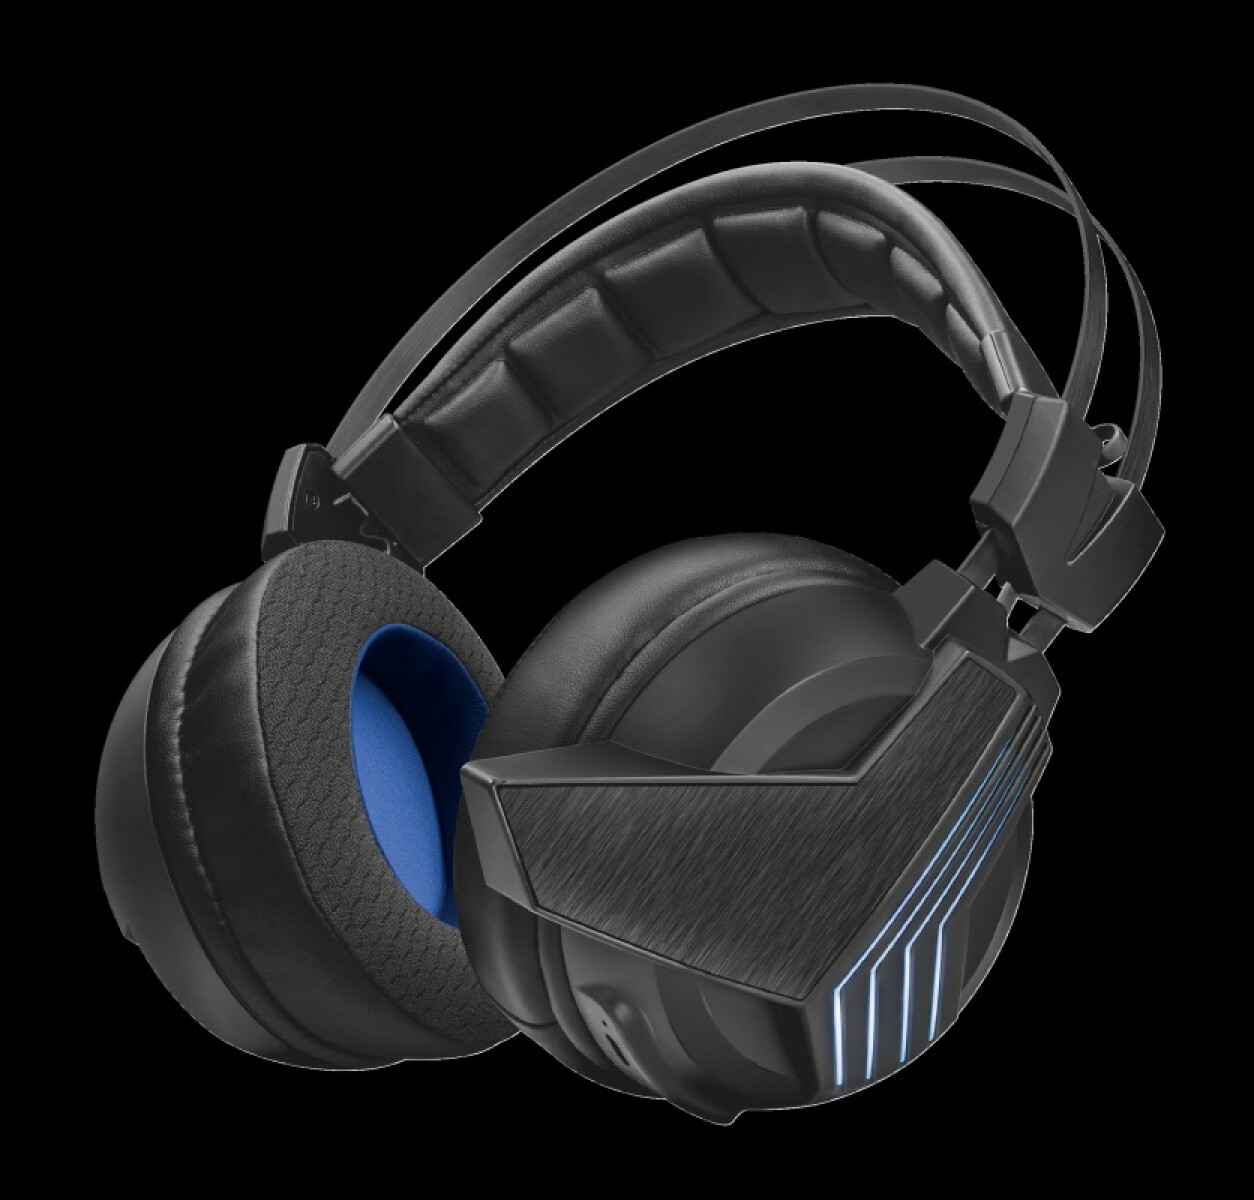 Auriculares Gaming Trust GXT393 7.1 Inalambrico Ps4 Xbox Pc - Auriculares Gaming Trust Gxt393 7.1 Inalambrico Ps4 Xbox Pc 